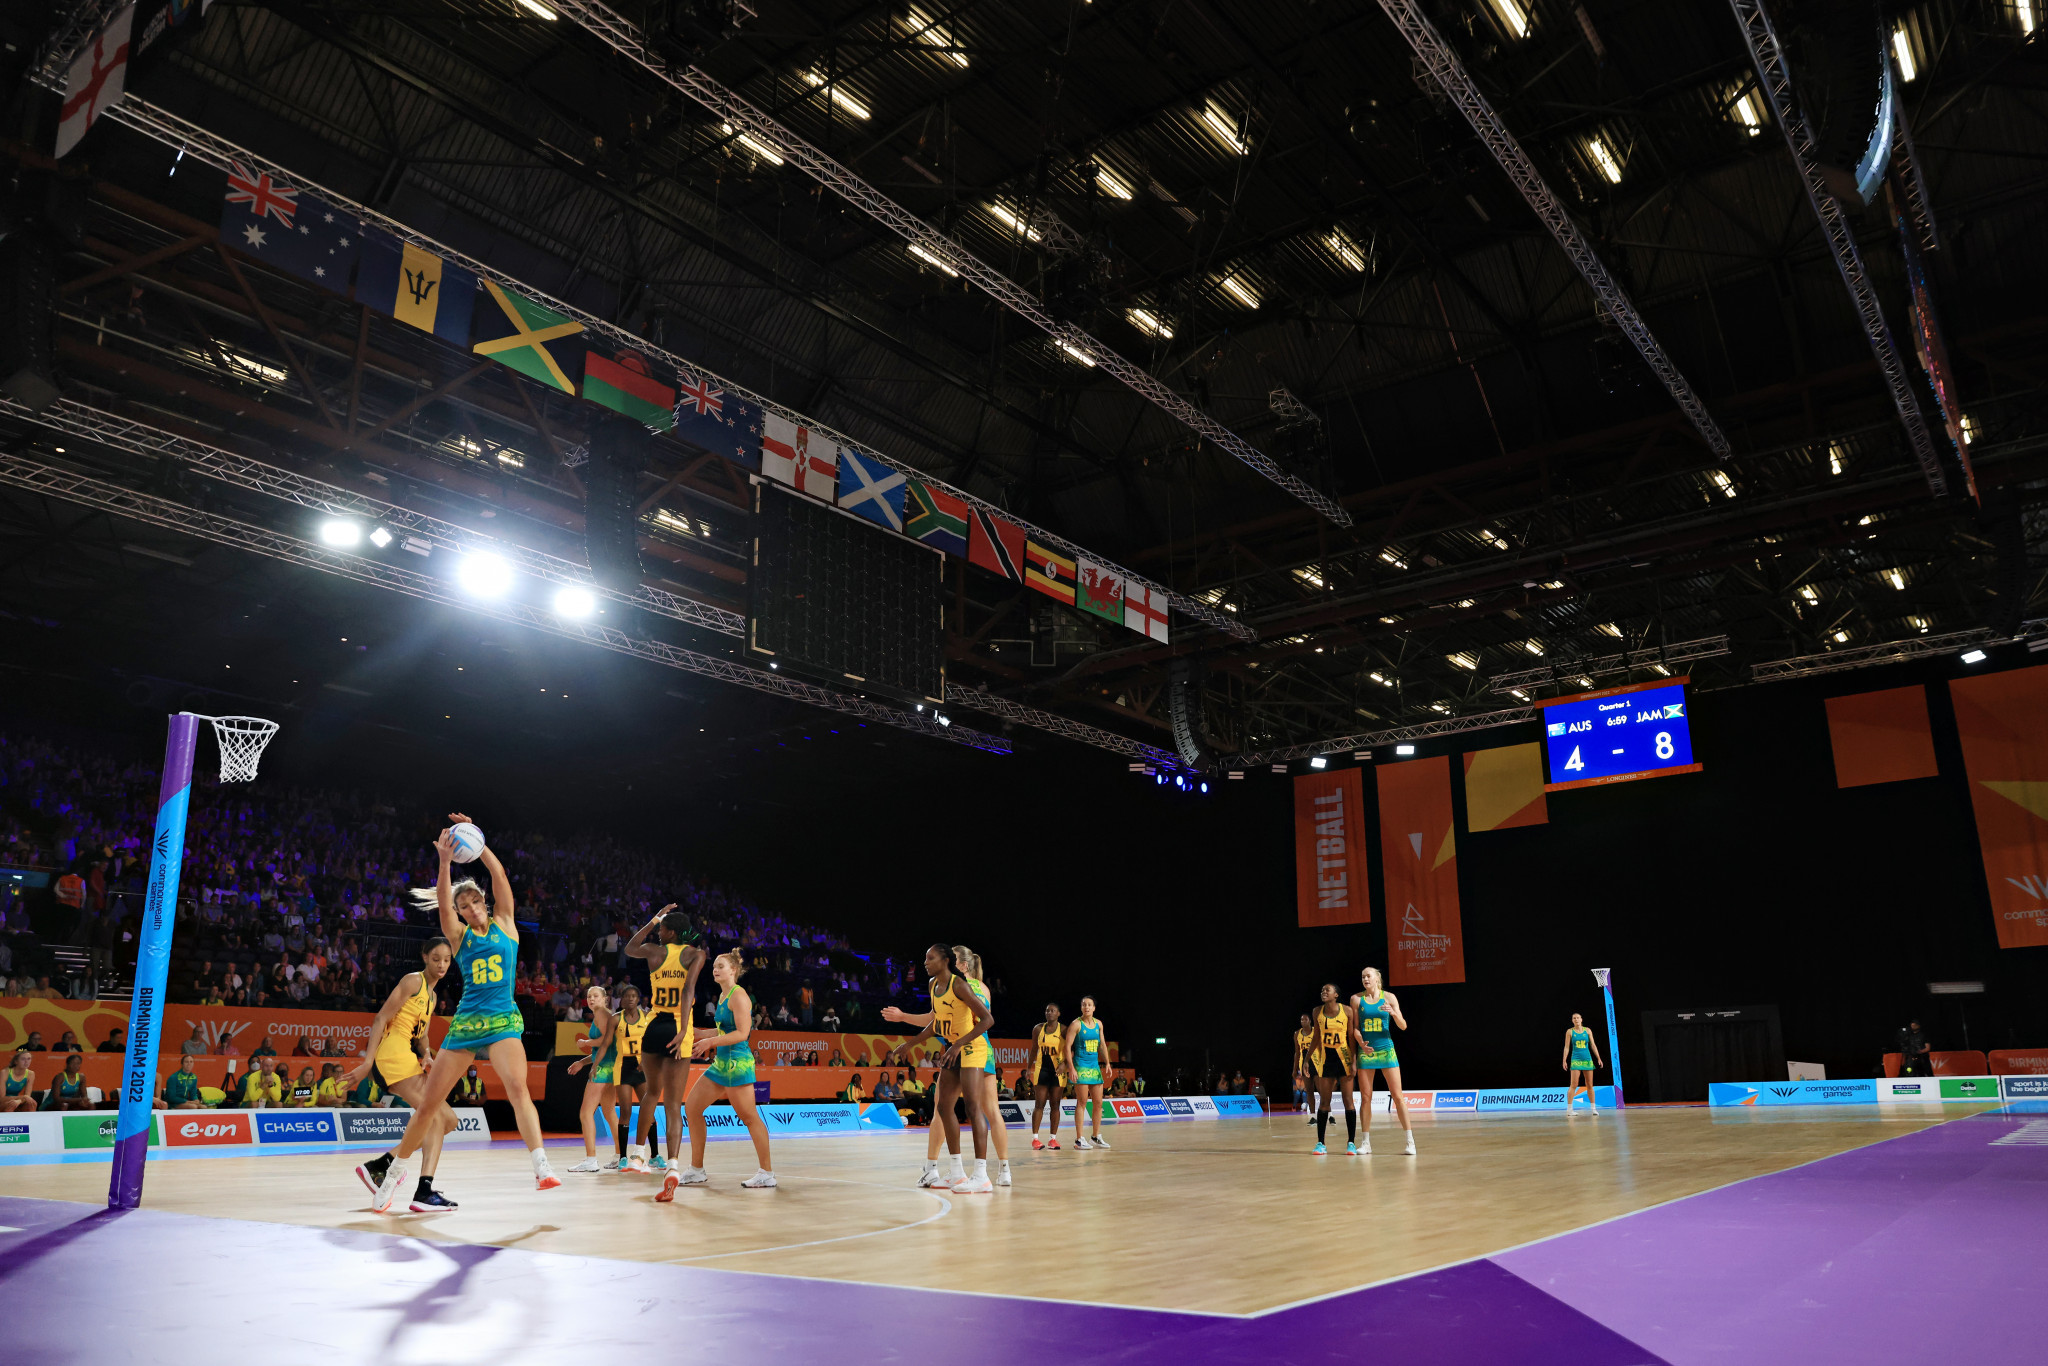 The NEC Arena in Birmingham held netball matches at the Commonwealth Games ©Getty Images